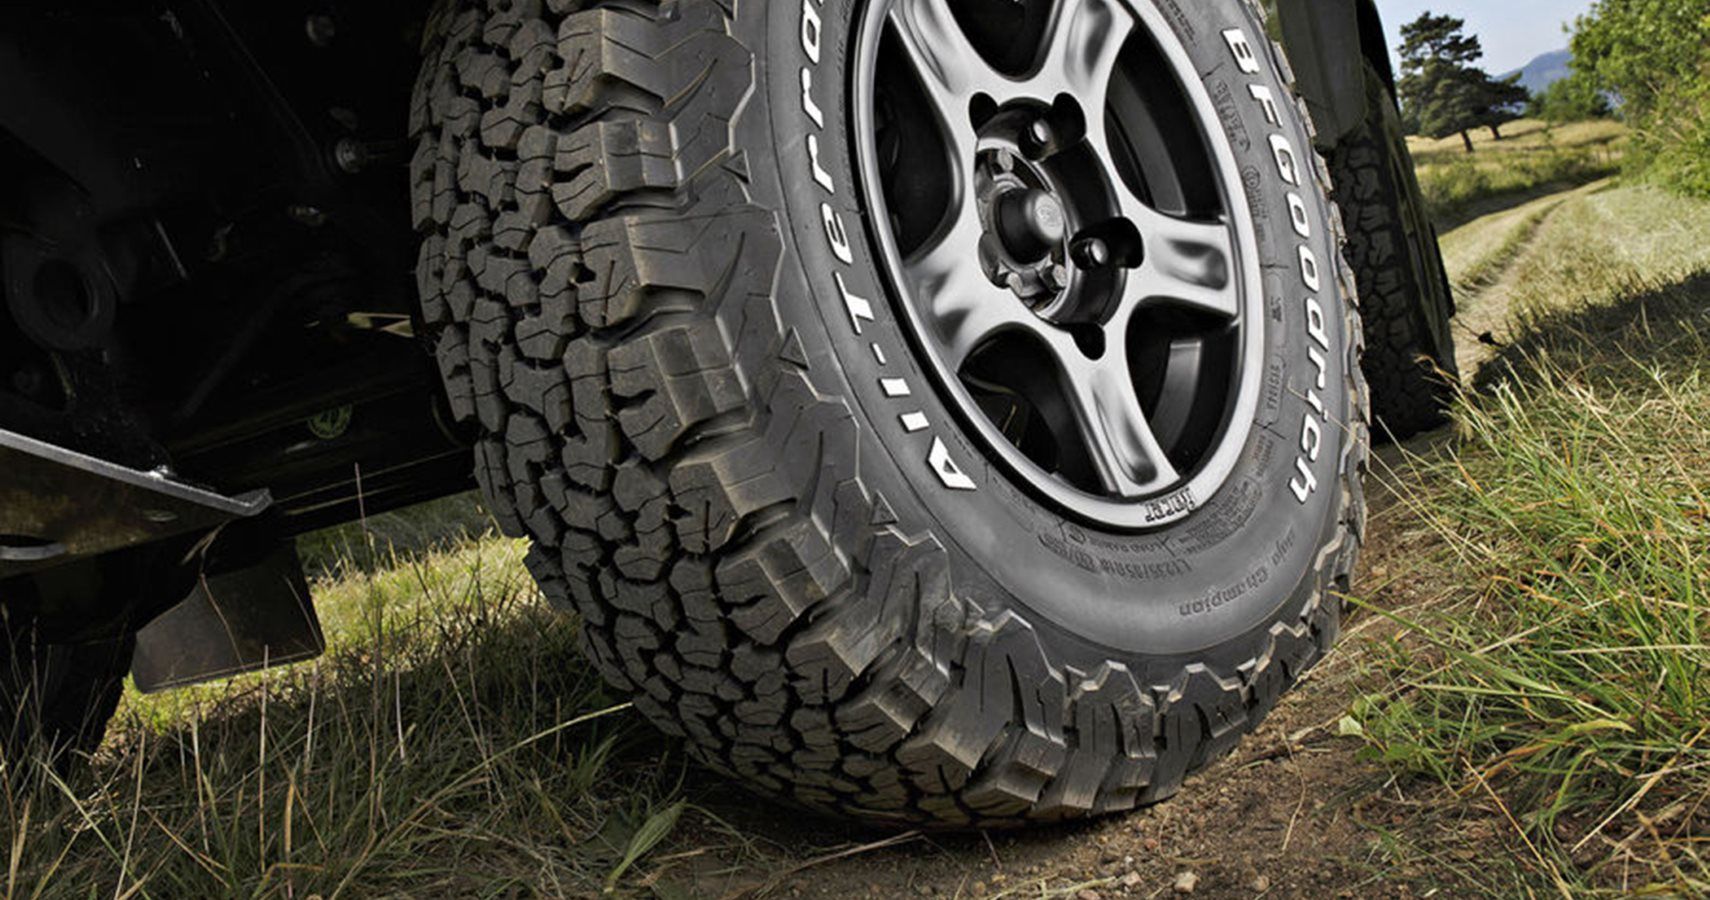 Big Tires Can Change Wheel Horsepower: Here's How